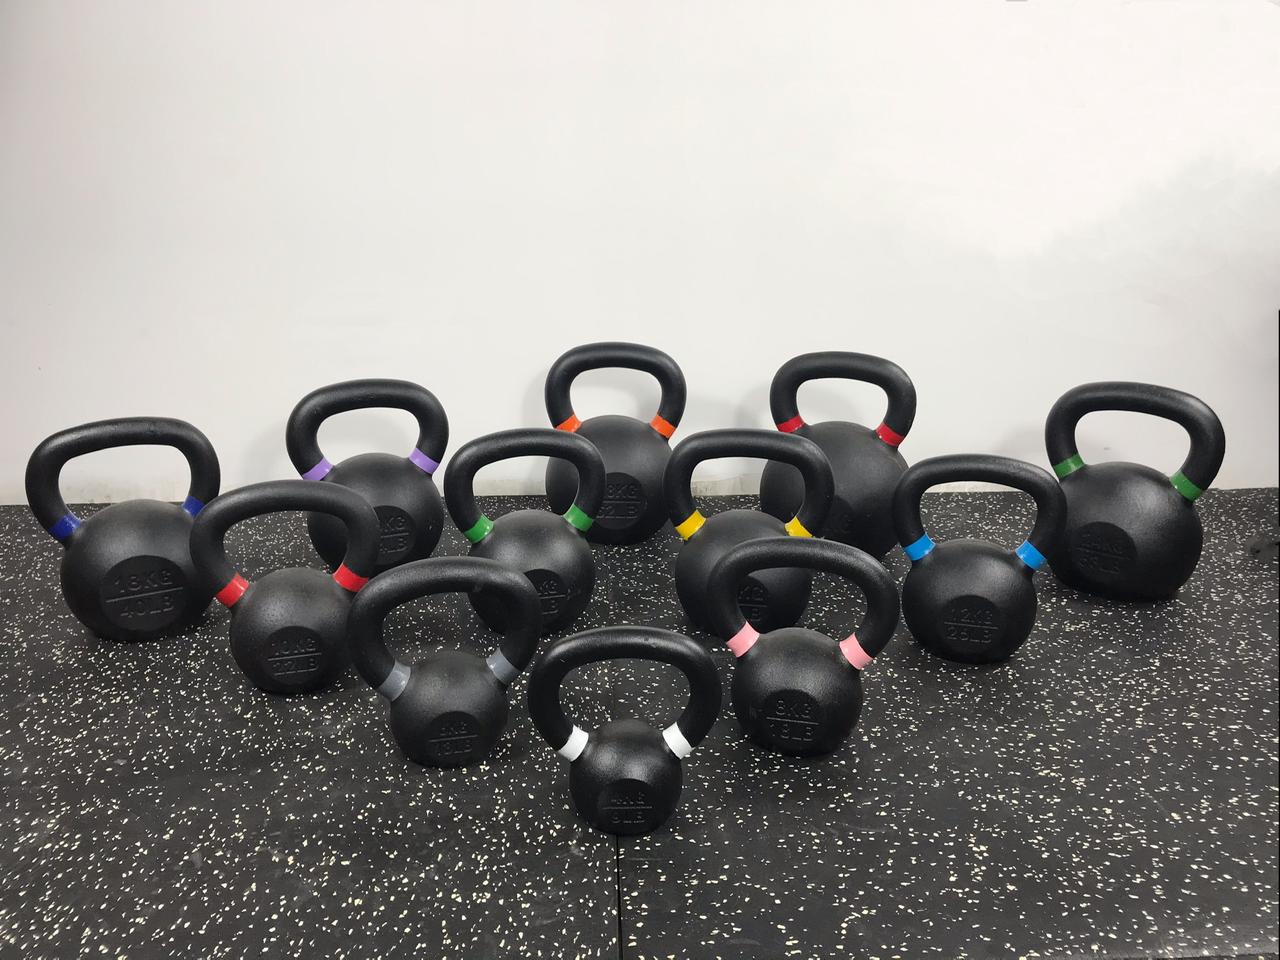 Kettlebell Set Review: Unbiased Analysis and Recommendations